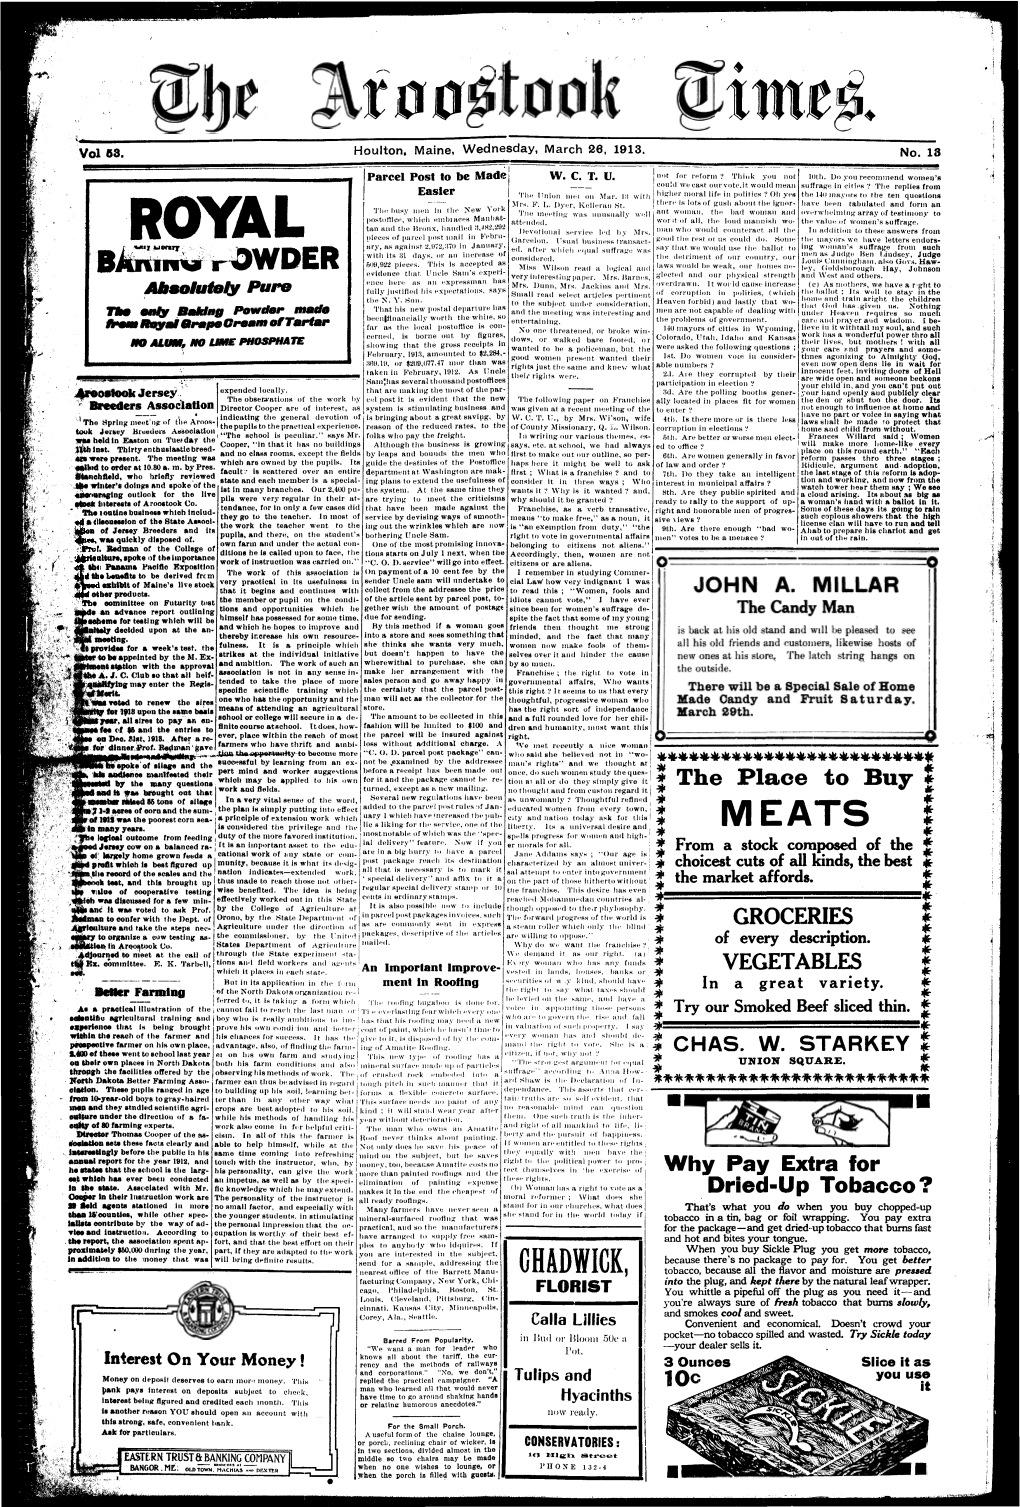 The Aroostook Times, March 26, 1913